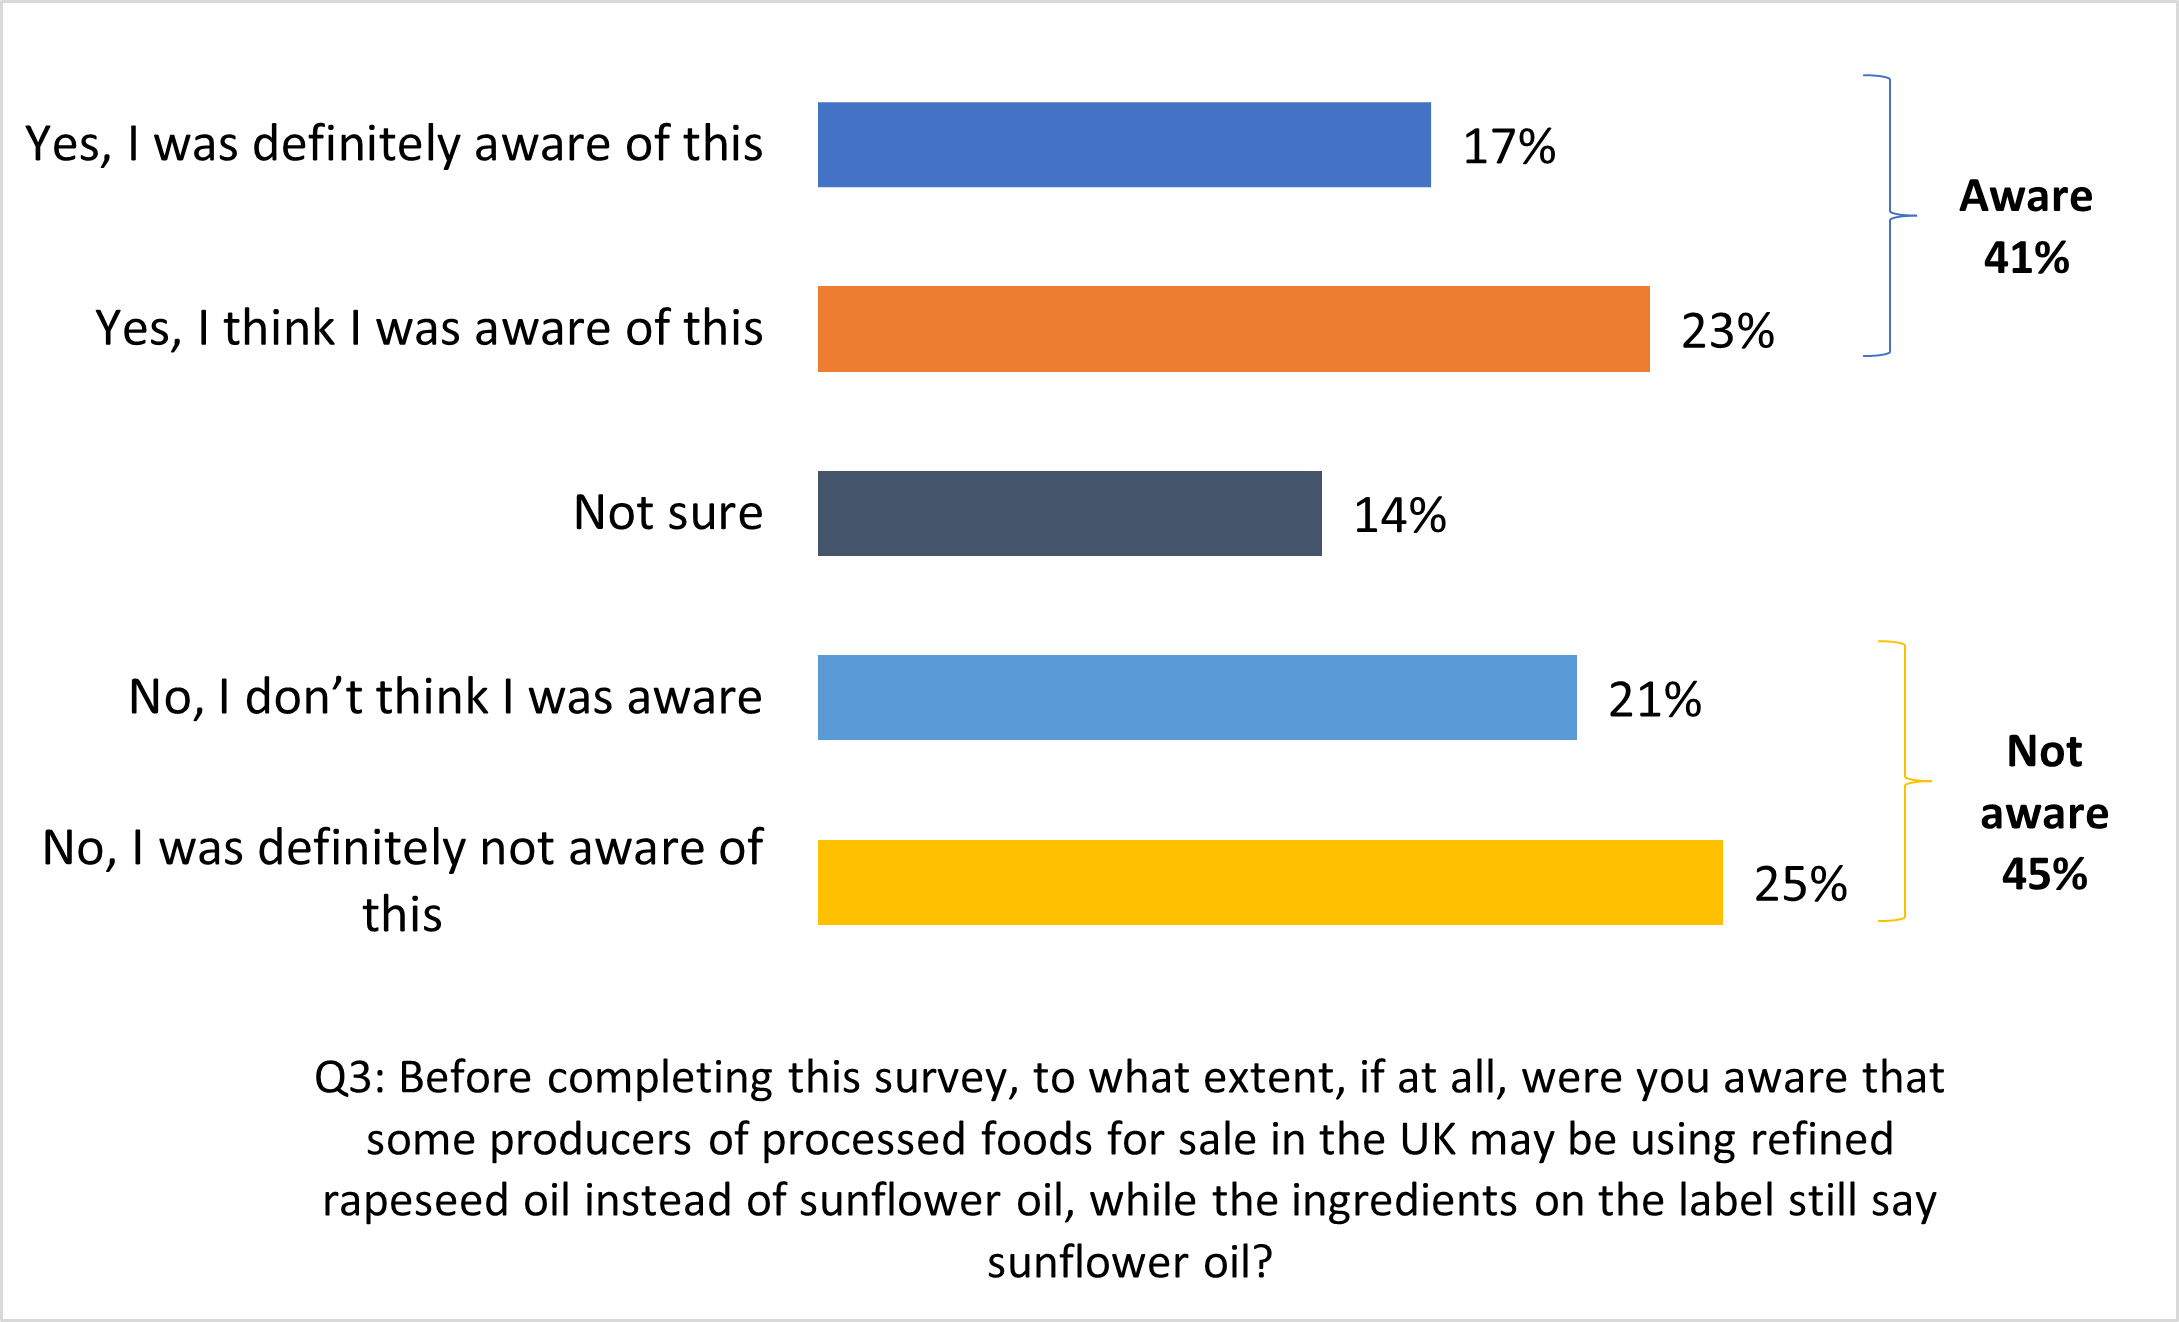 Level of consumer awareness of rapeseed oil substituting sunflower oil 41% are aware and 45% not aware. 